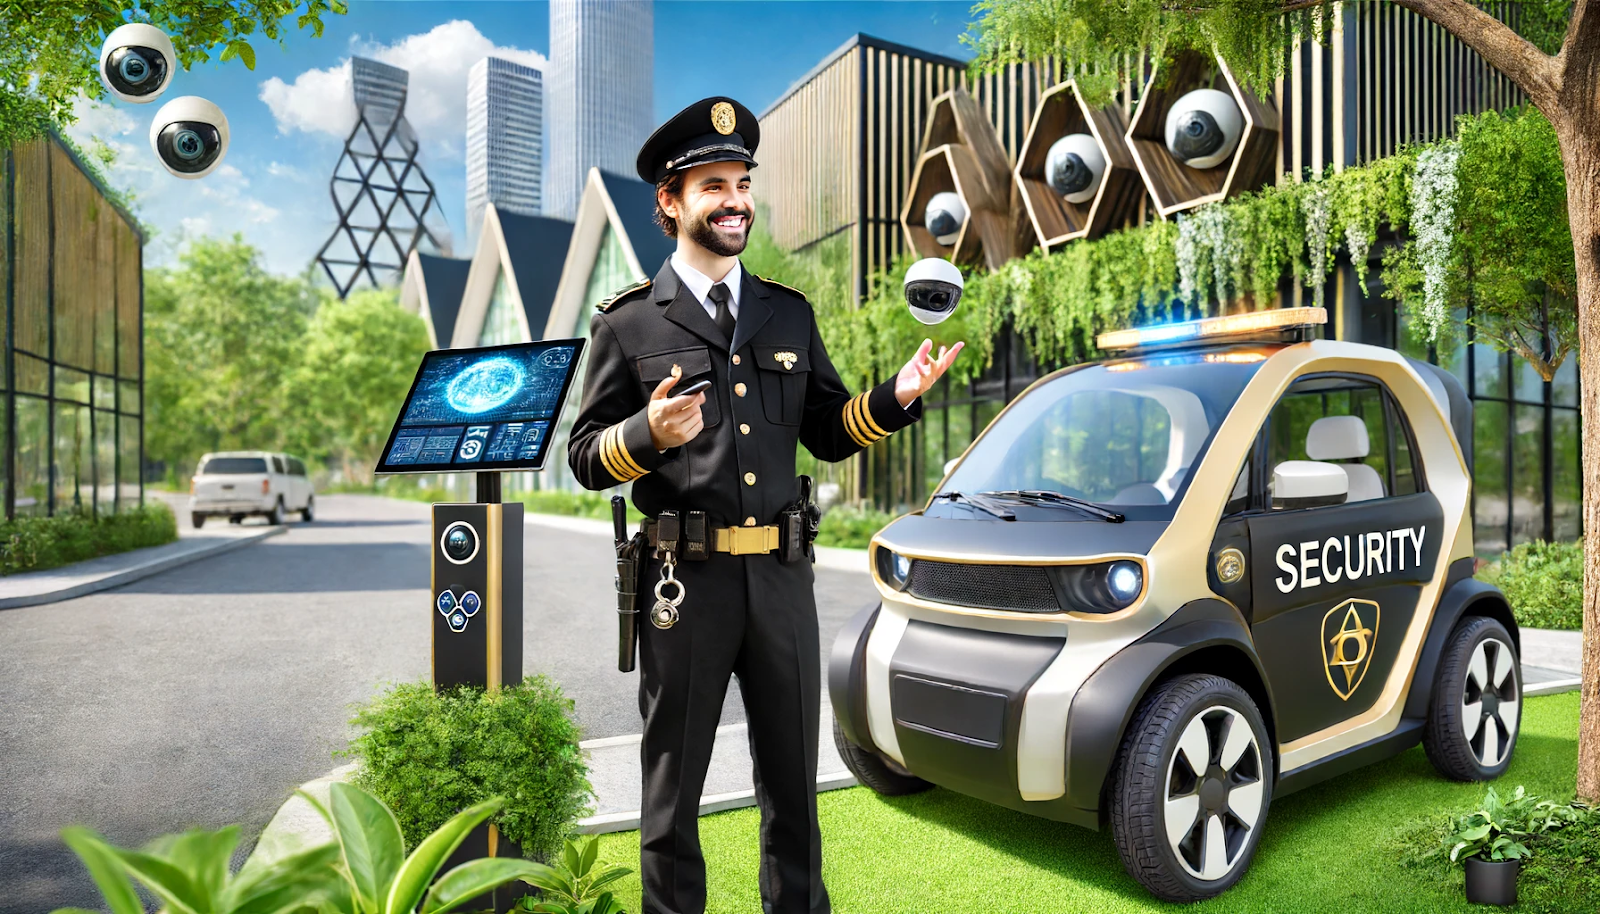 Cheerful security guard in black and gold uniform using eco-friendly technology in a green environment